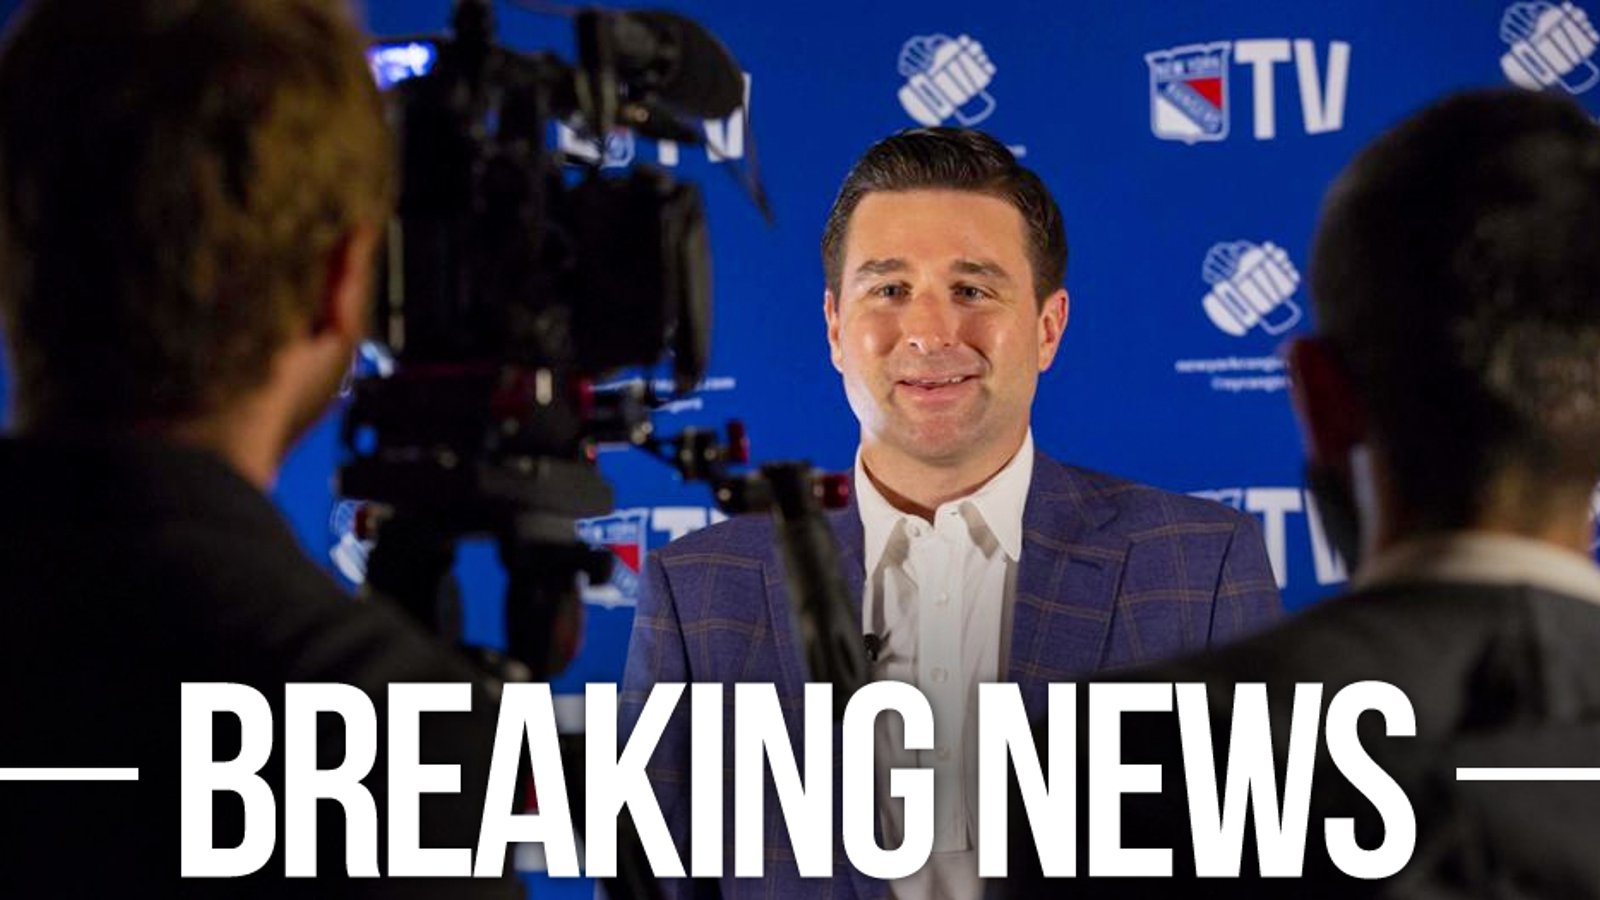 Report: Chris Drury to be named new GM of Rangers after Gorton's surprise firing